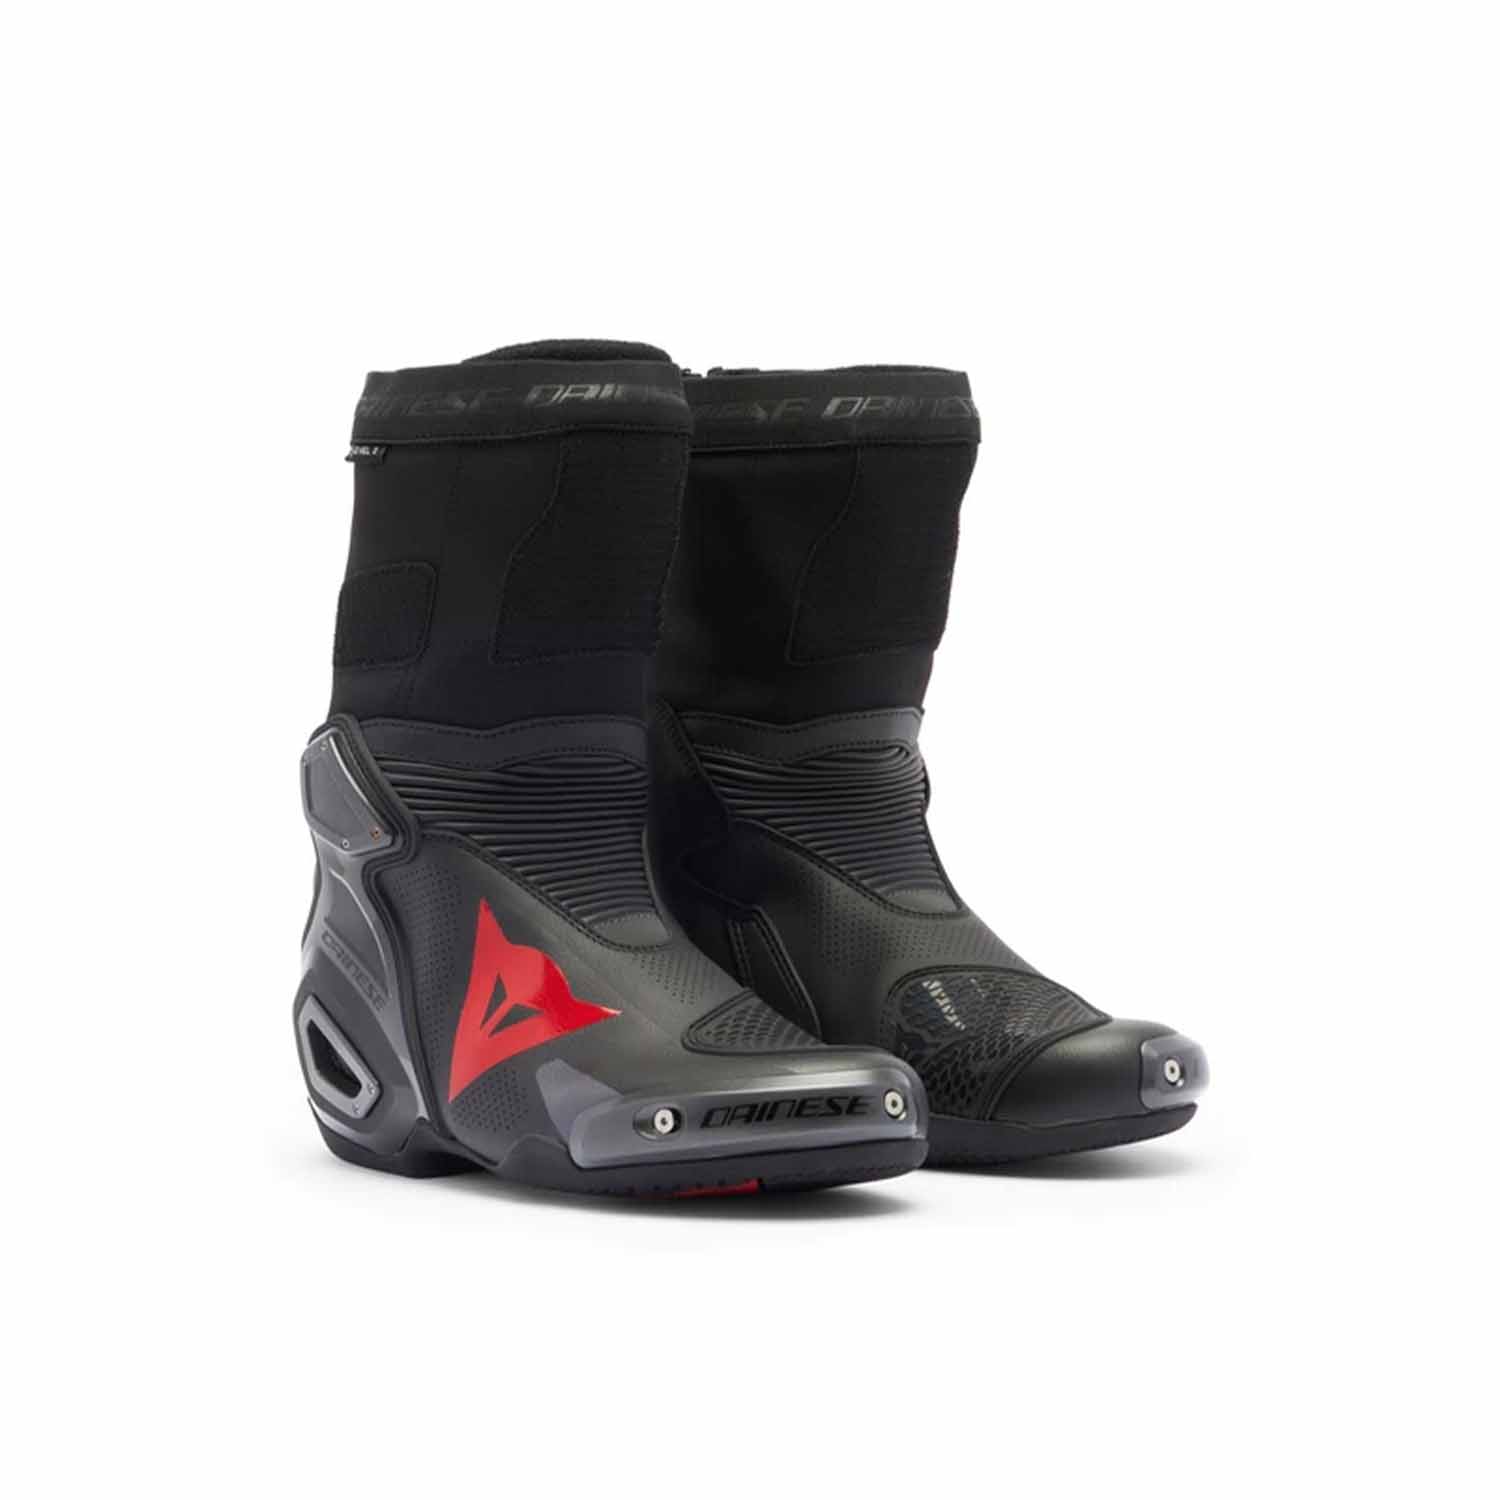 Image of Dainese Axial 2 Air Boots Black Red Fluo Size 42 ID 8051019739742